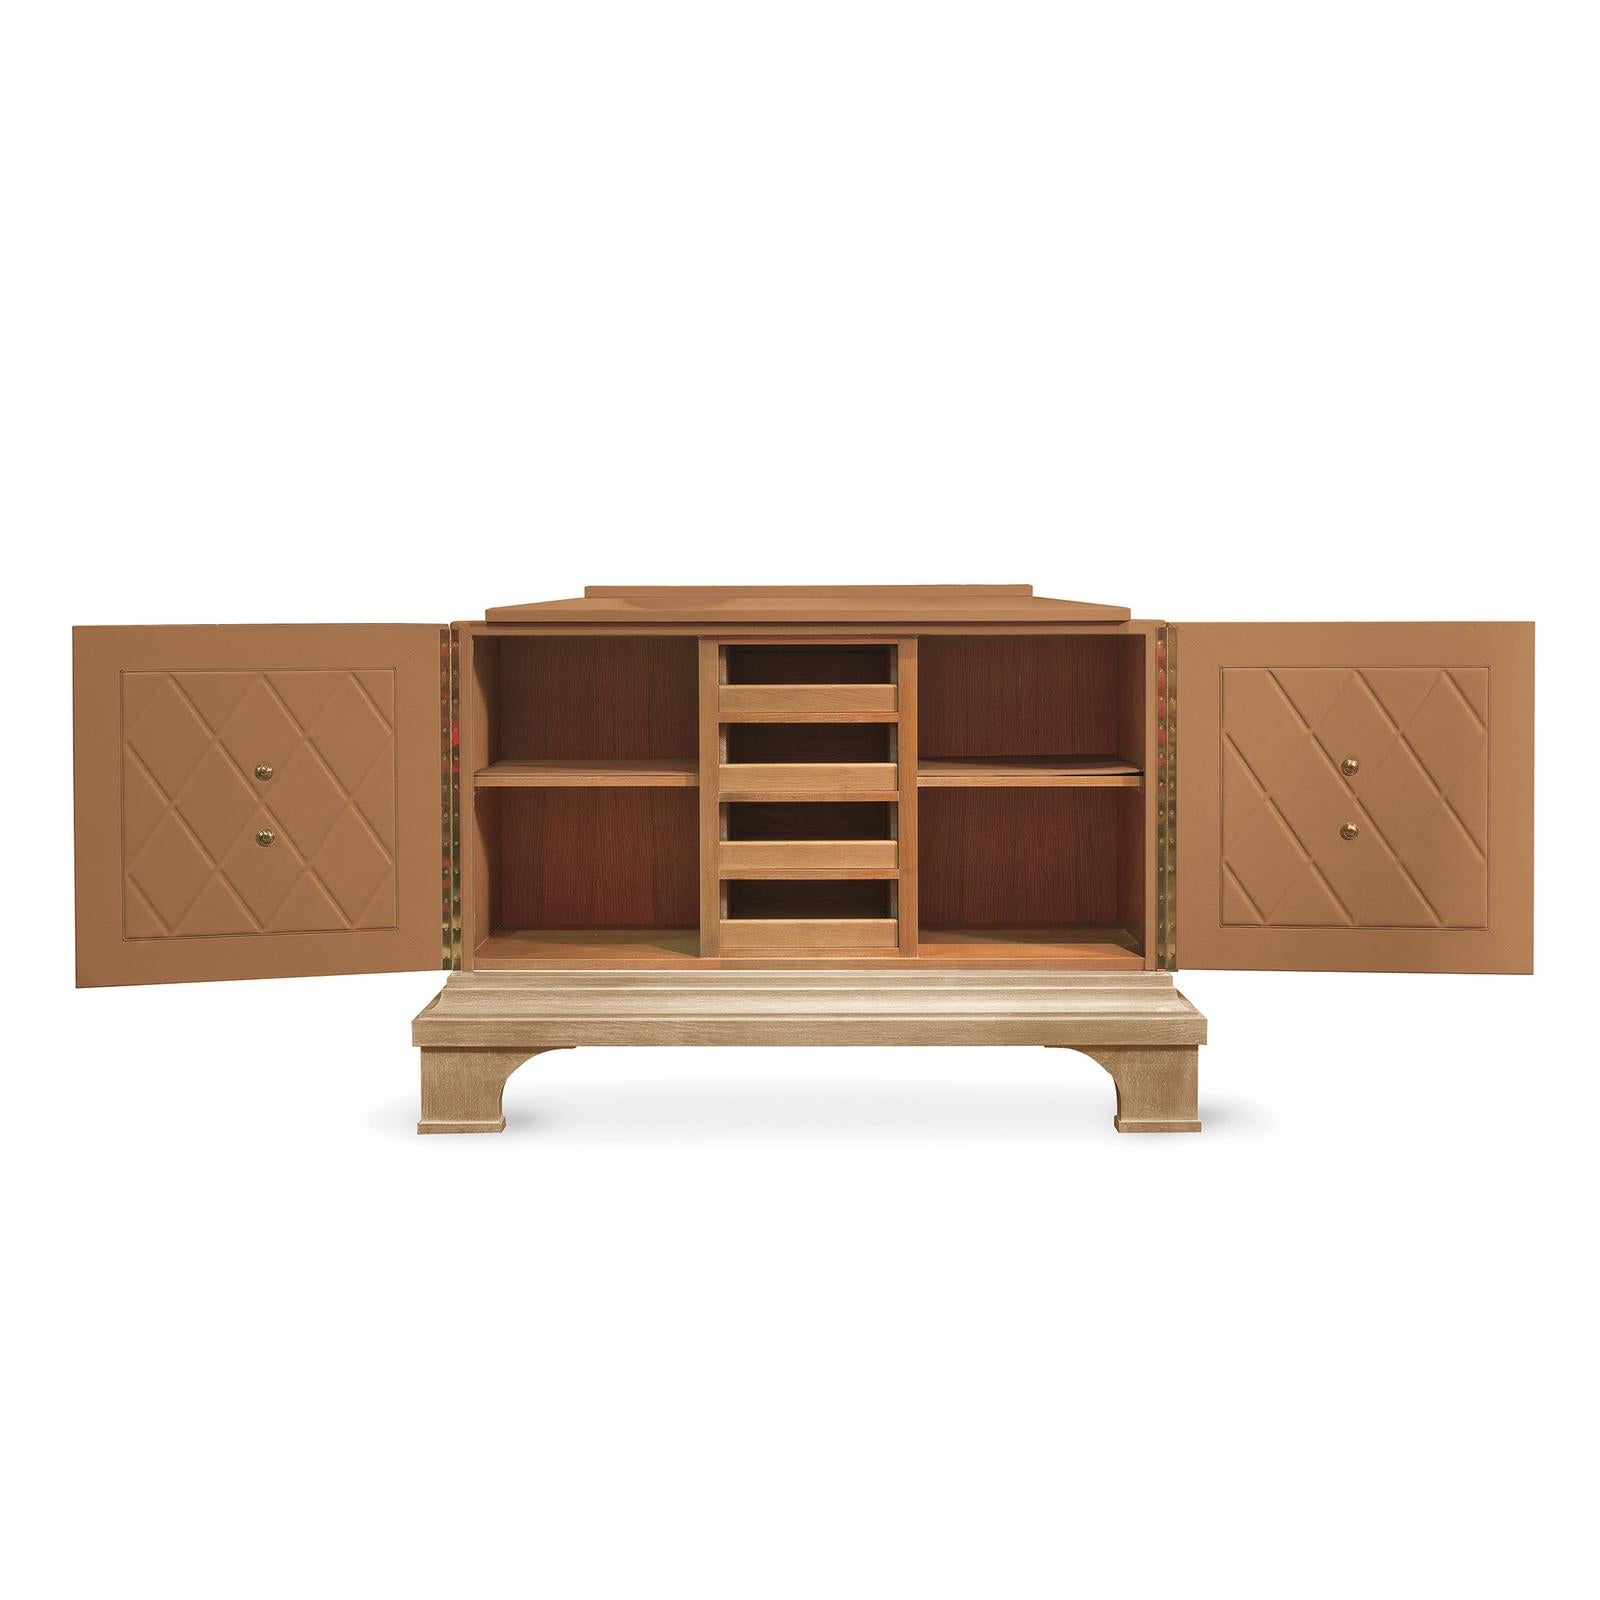 A stunning example of a traditional design reinvented with a modern flair, this sideboard is an exquisite object of functional decor that will complement a classically furnished home, making a sophisticated statement. Entirely handcrafted, this